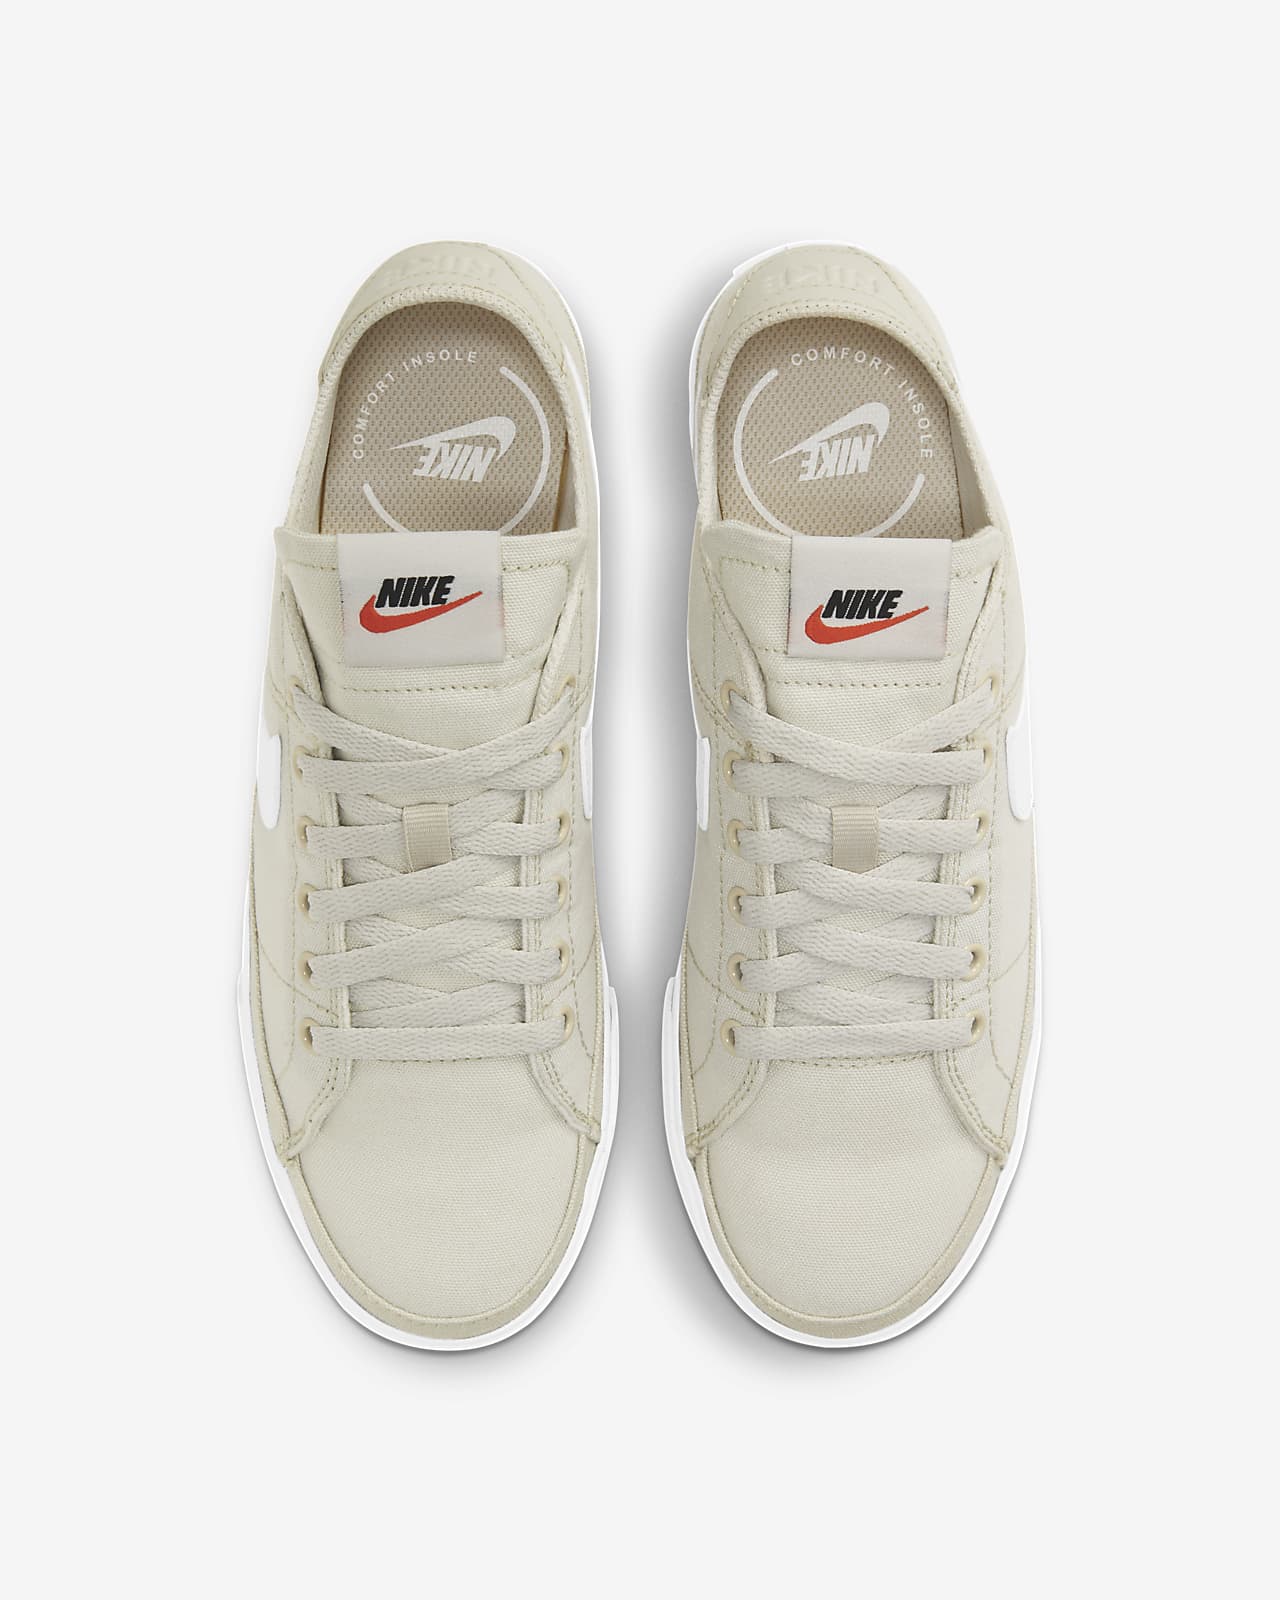 womens white nike canvas shoes